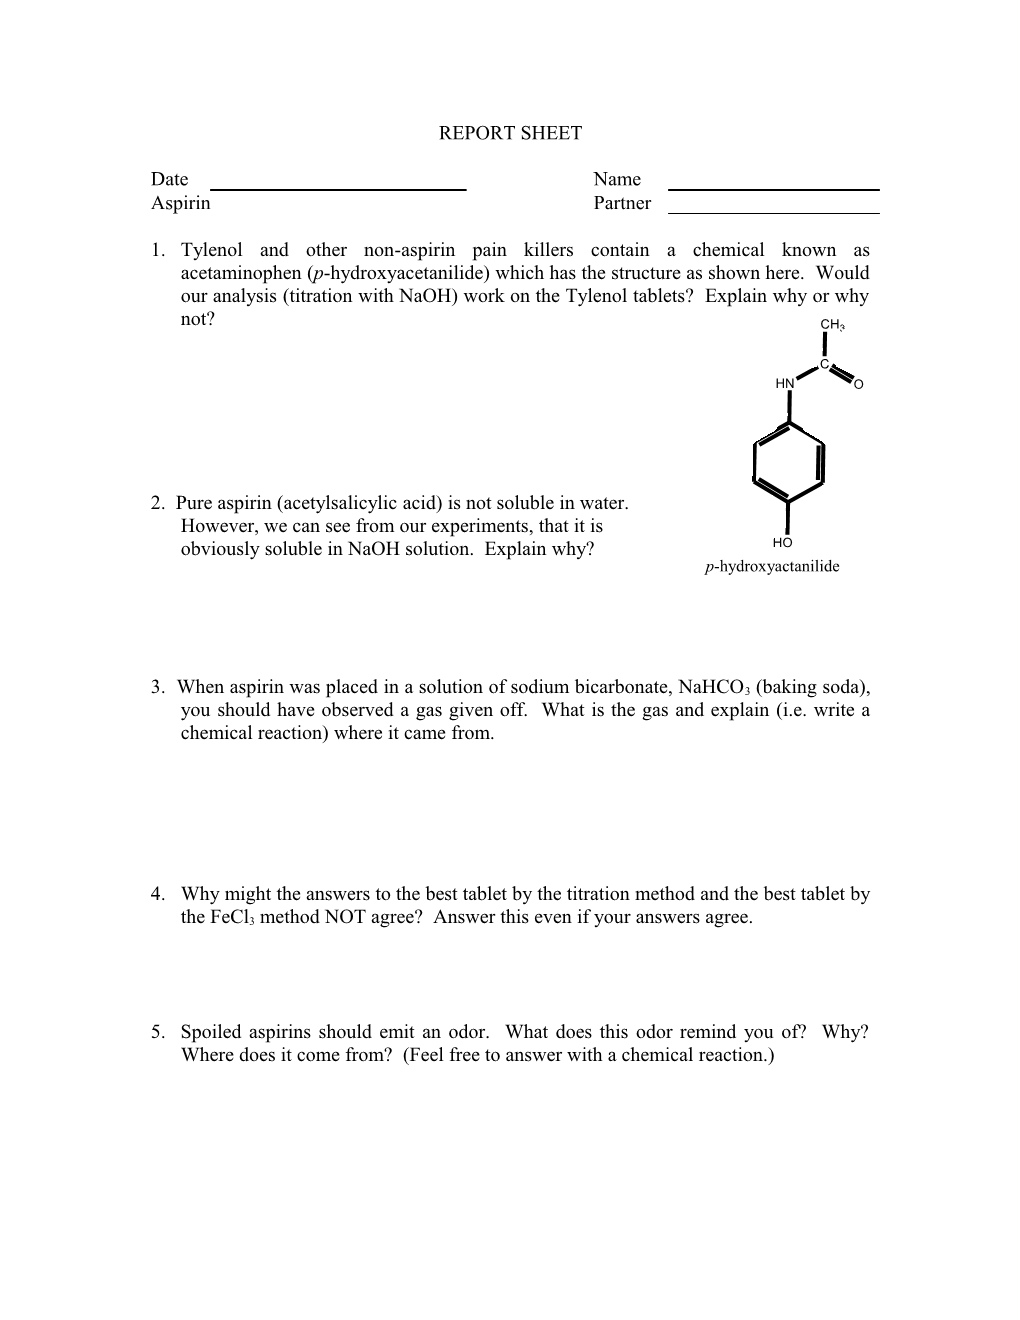 2. Pure Aspirin (Acetylsalicylic Acid) Is Not Soluble in Water